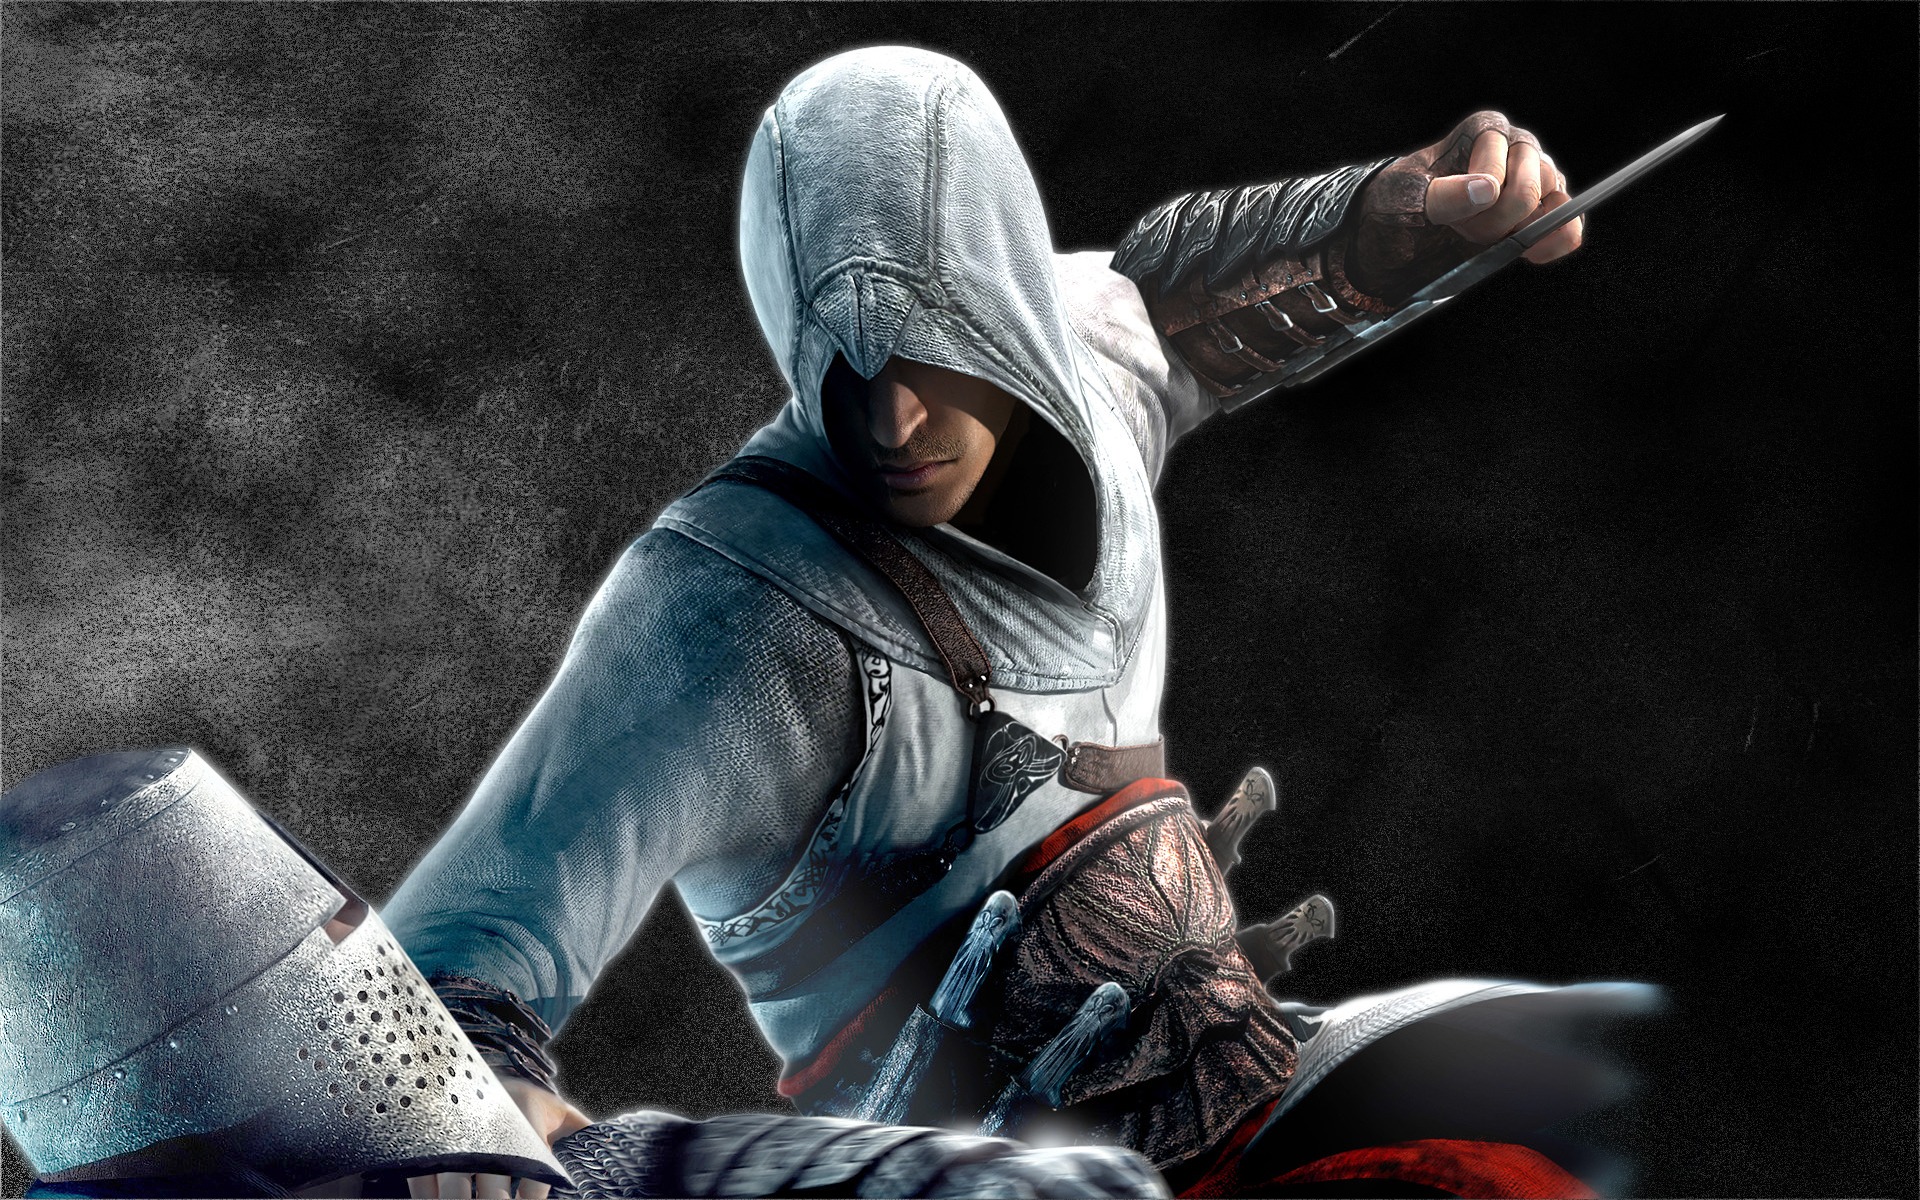 AssasinS Creed Wallpaper Assasins Creed Games Wallpapers in jpg format for free download